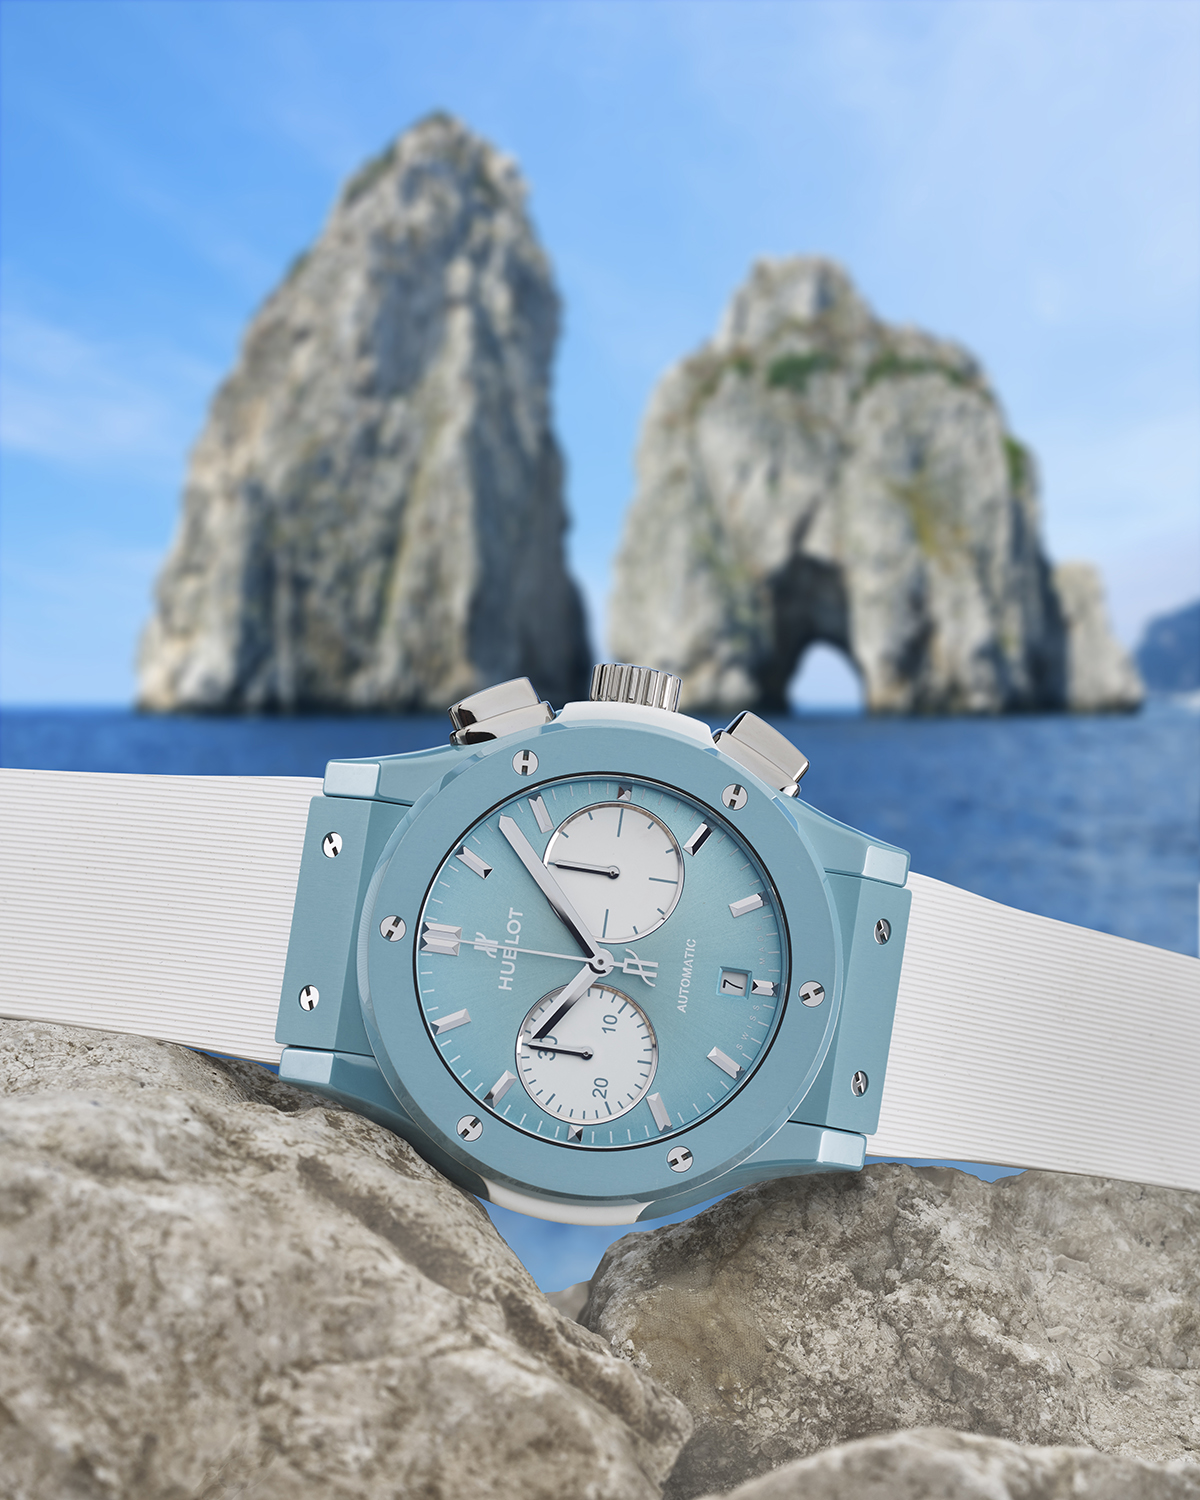 Luxury blue and white watch pictured on sand